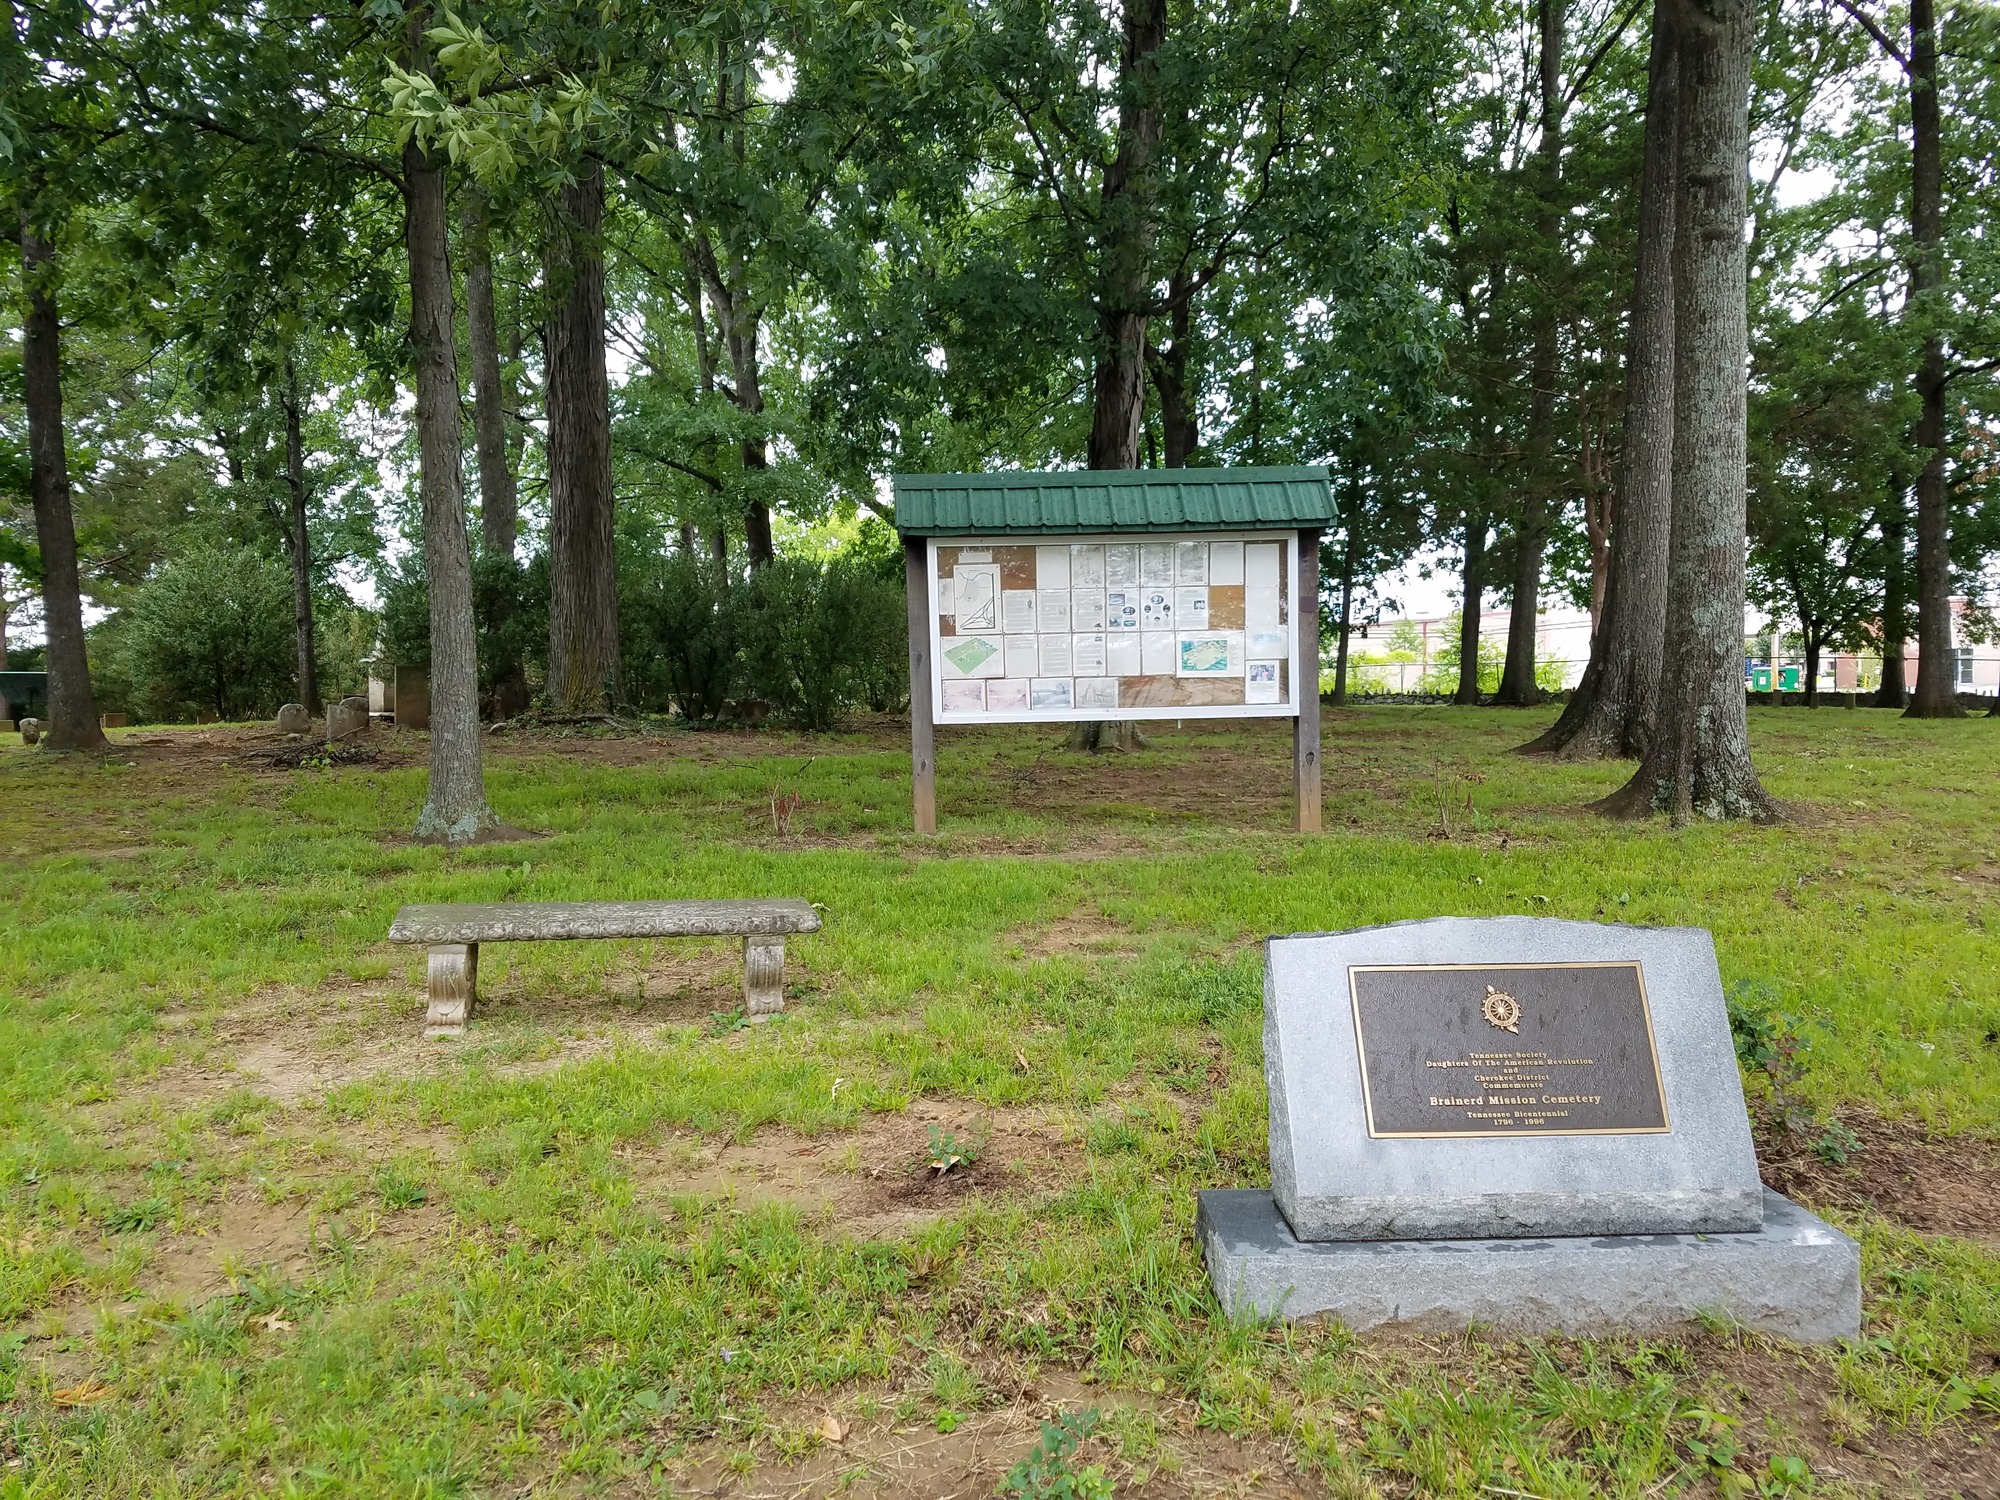 A kiosk and marker at the Brainerd Mission Cemetery in Chattanooga, Tennessee